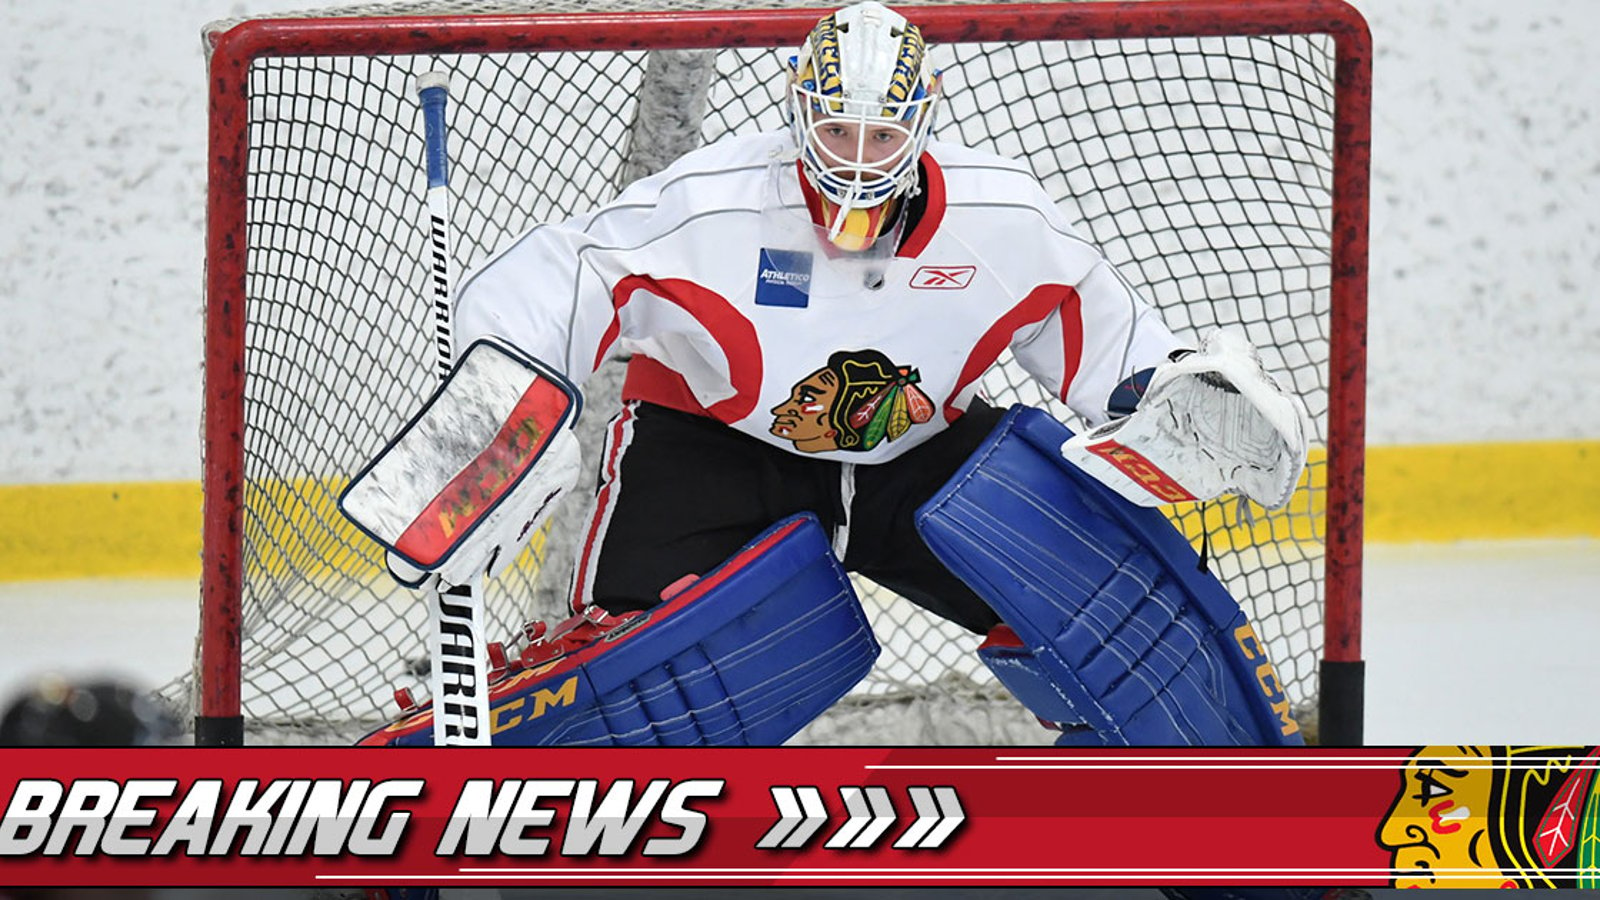 Breaking: Blackhawks goalie rips up KHL contract, headed for North America